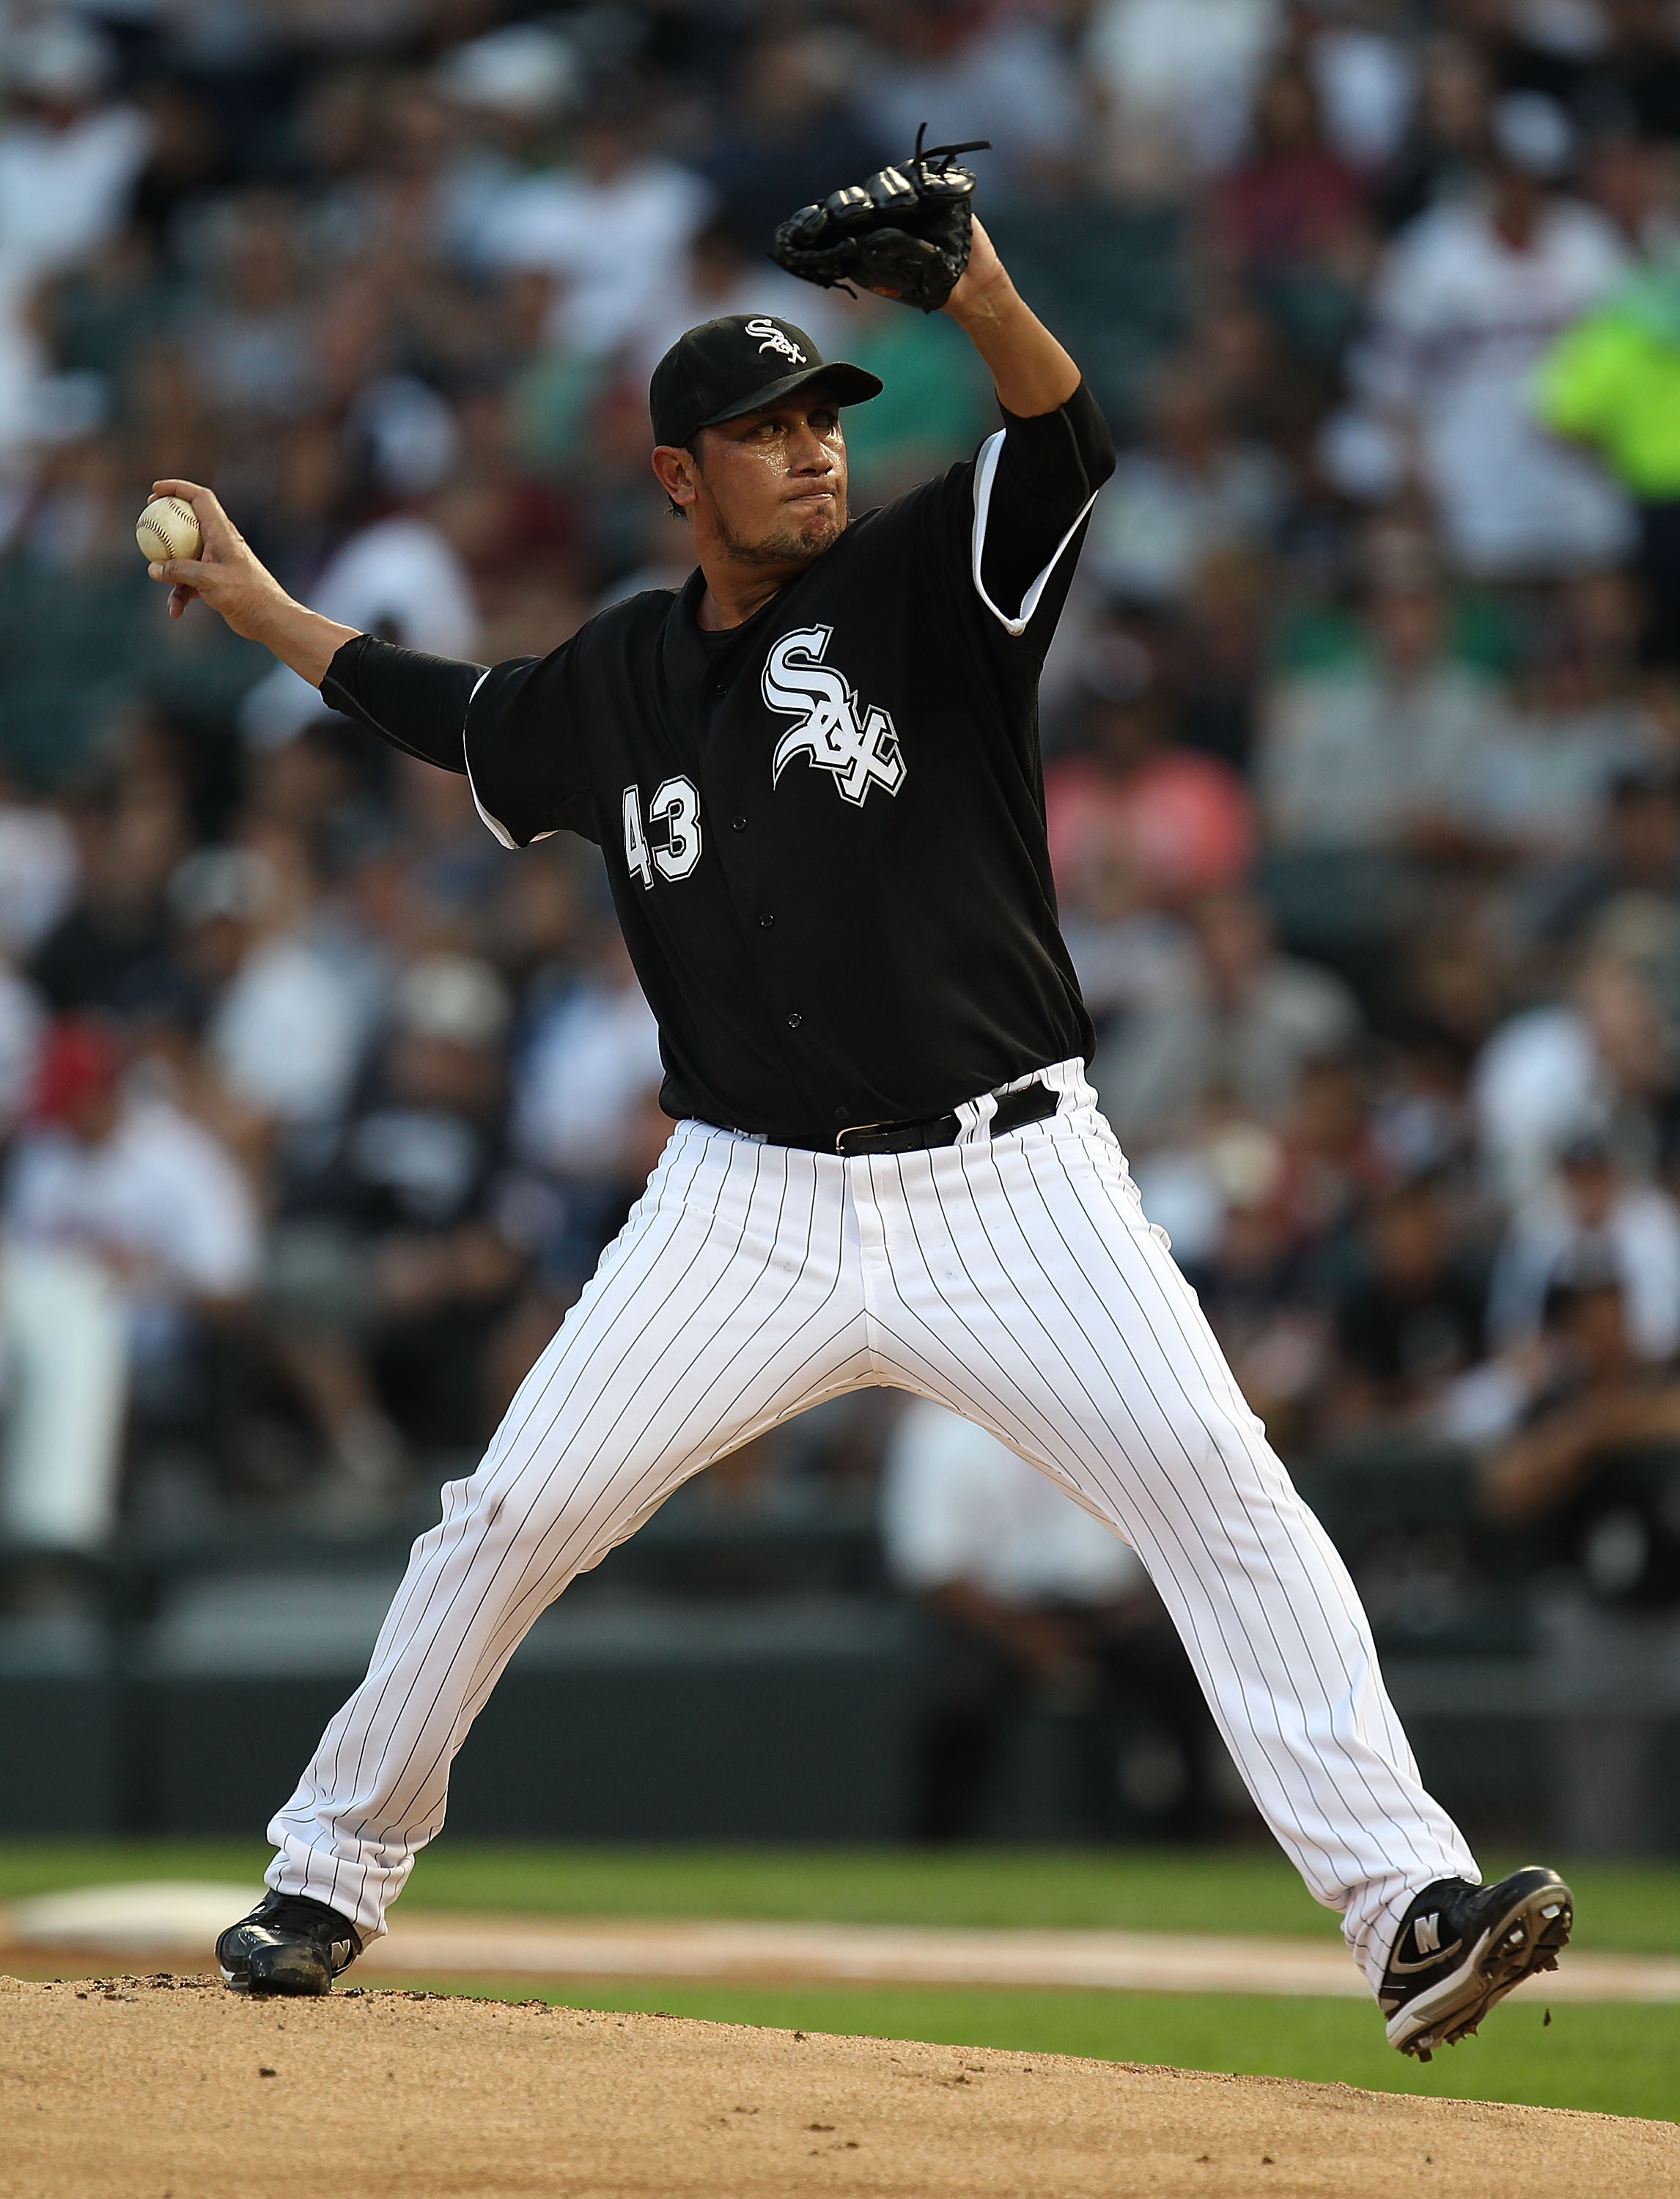 CHICAGO - AUGUST 10: Starting pitcher Freddy Garcia #43 of the Chicago White Sox delivers the ball against the Minnesota Twins at U.S. Cellular Field on August 10, 2010 in Chicago, Illinois. (Photo by Jonathan Daniel/Getty Images)